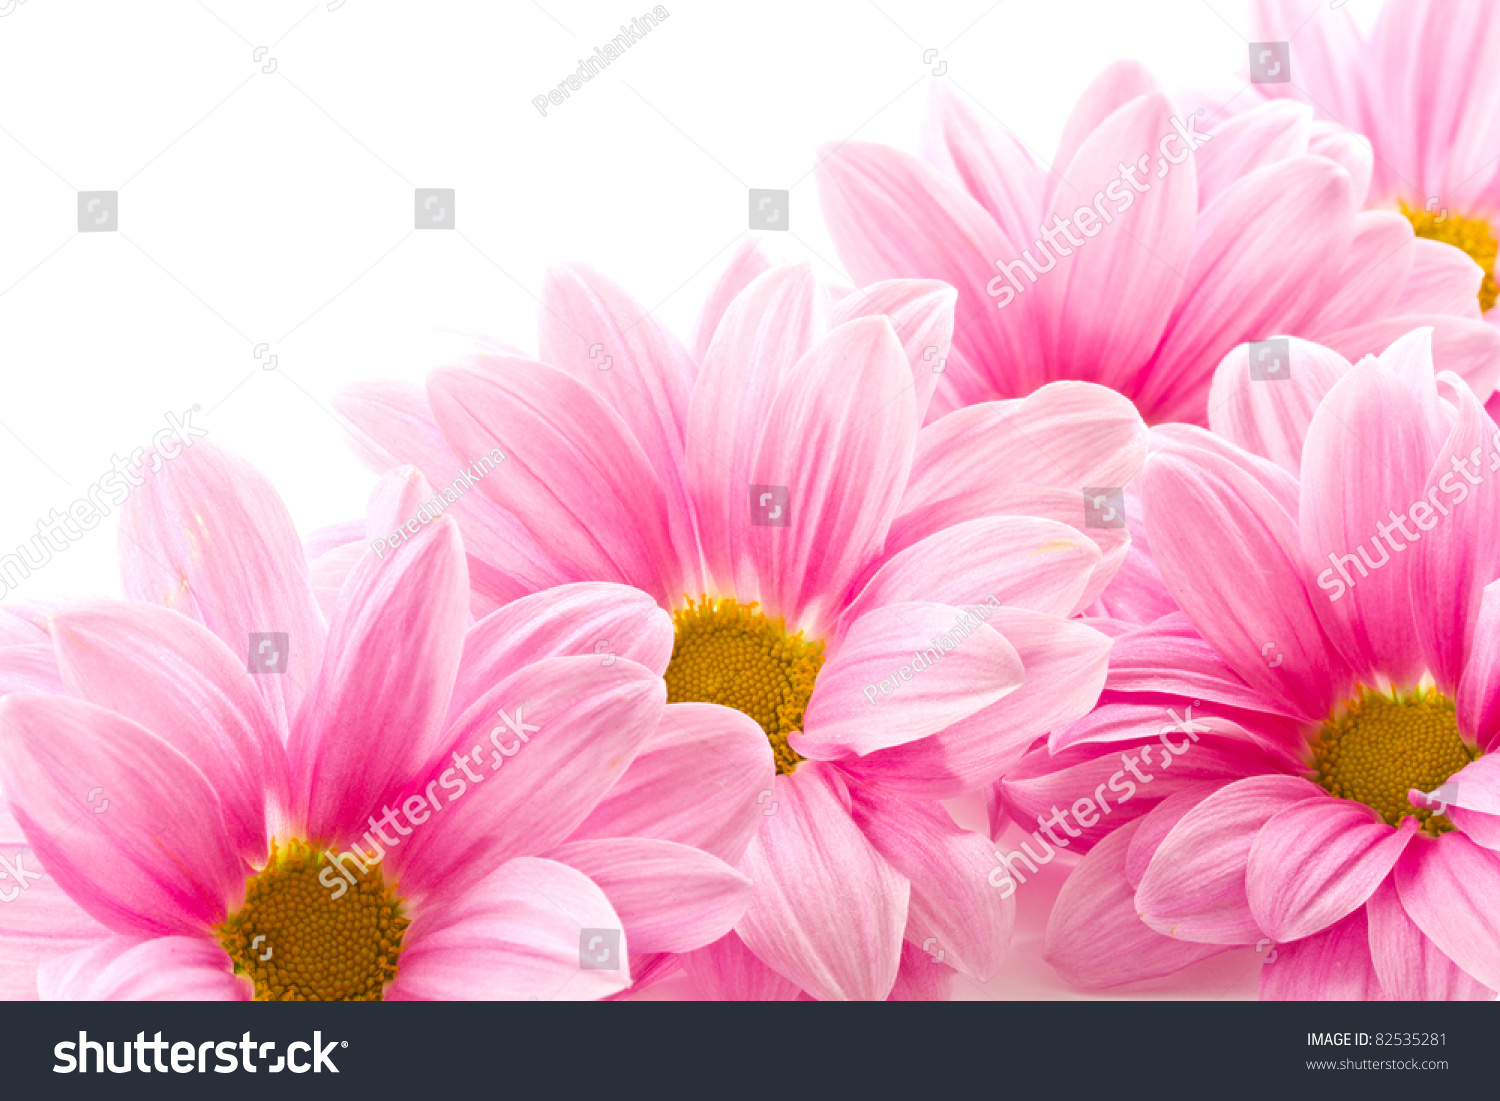 Beautiful Blooming Pink Flowers On A White Background Stock Photo ...